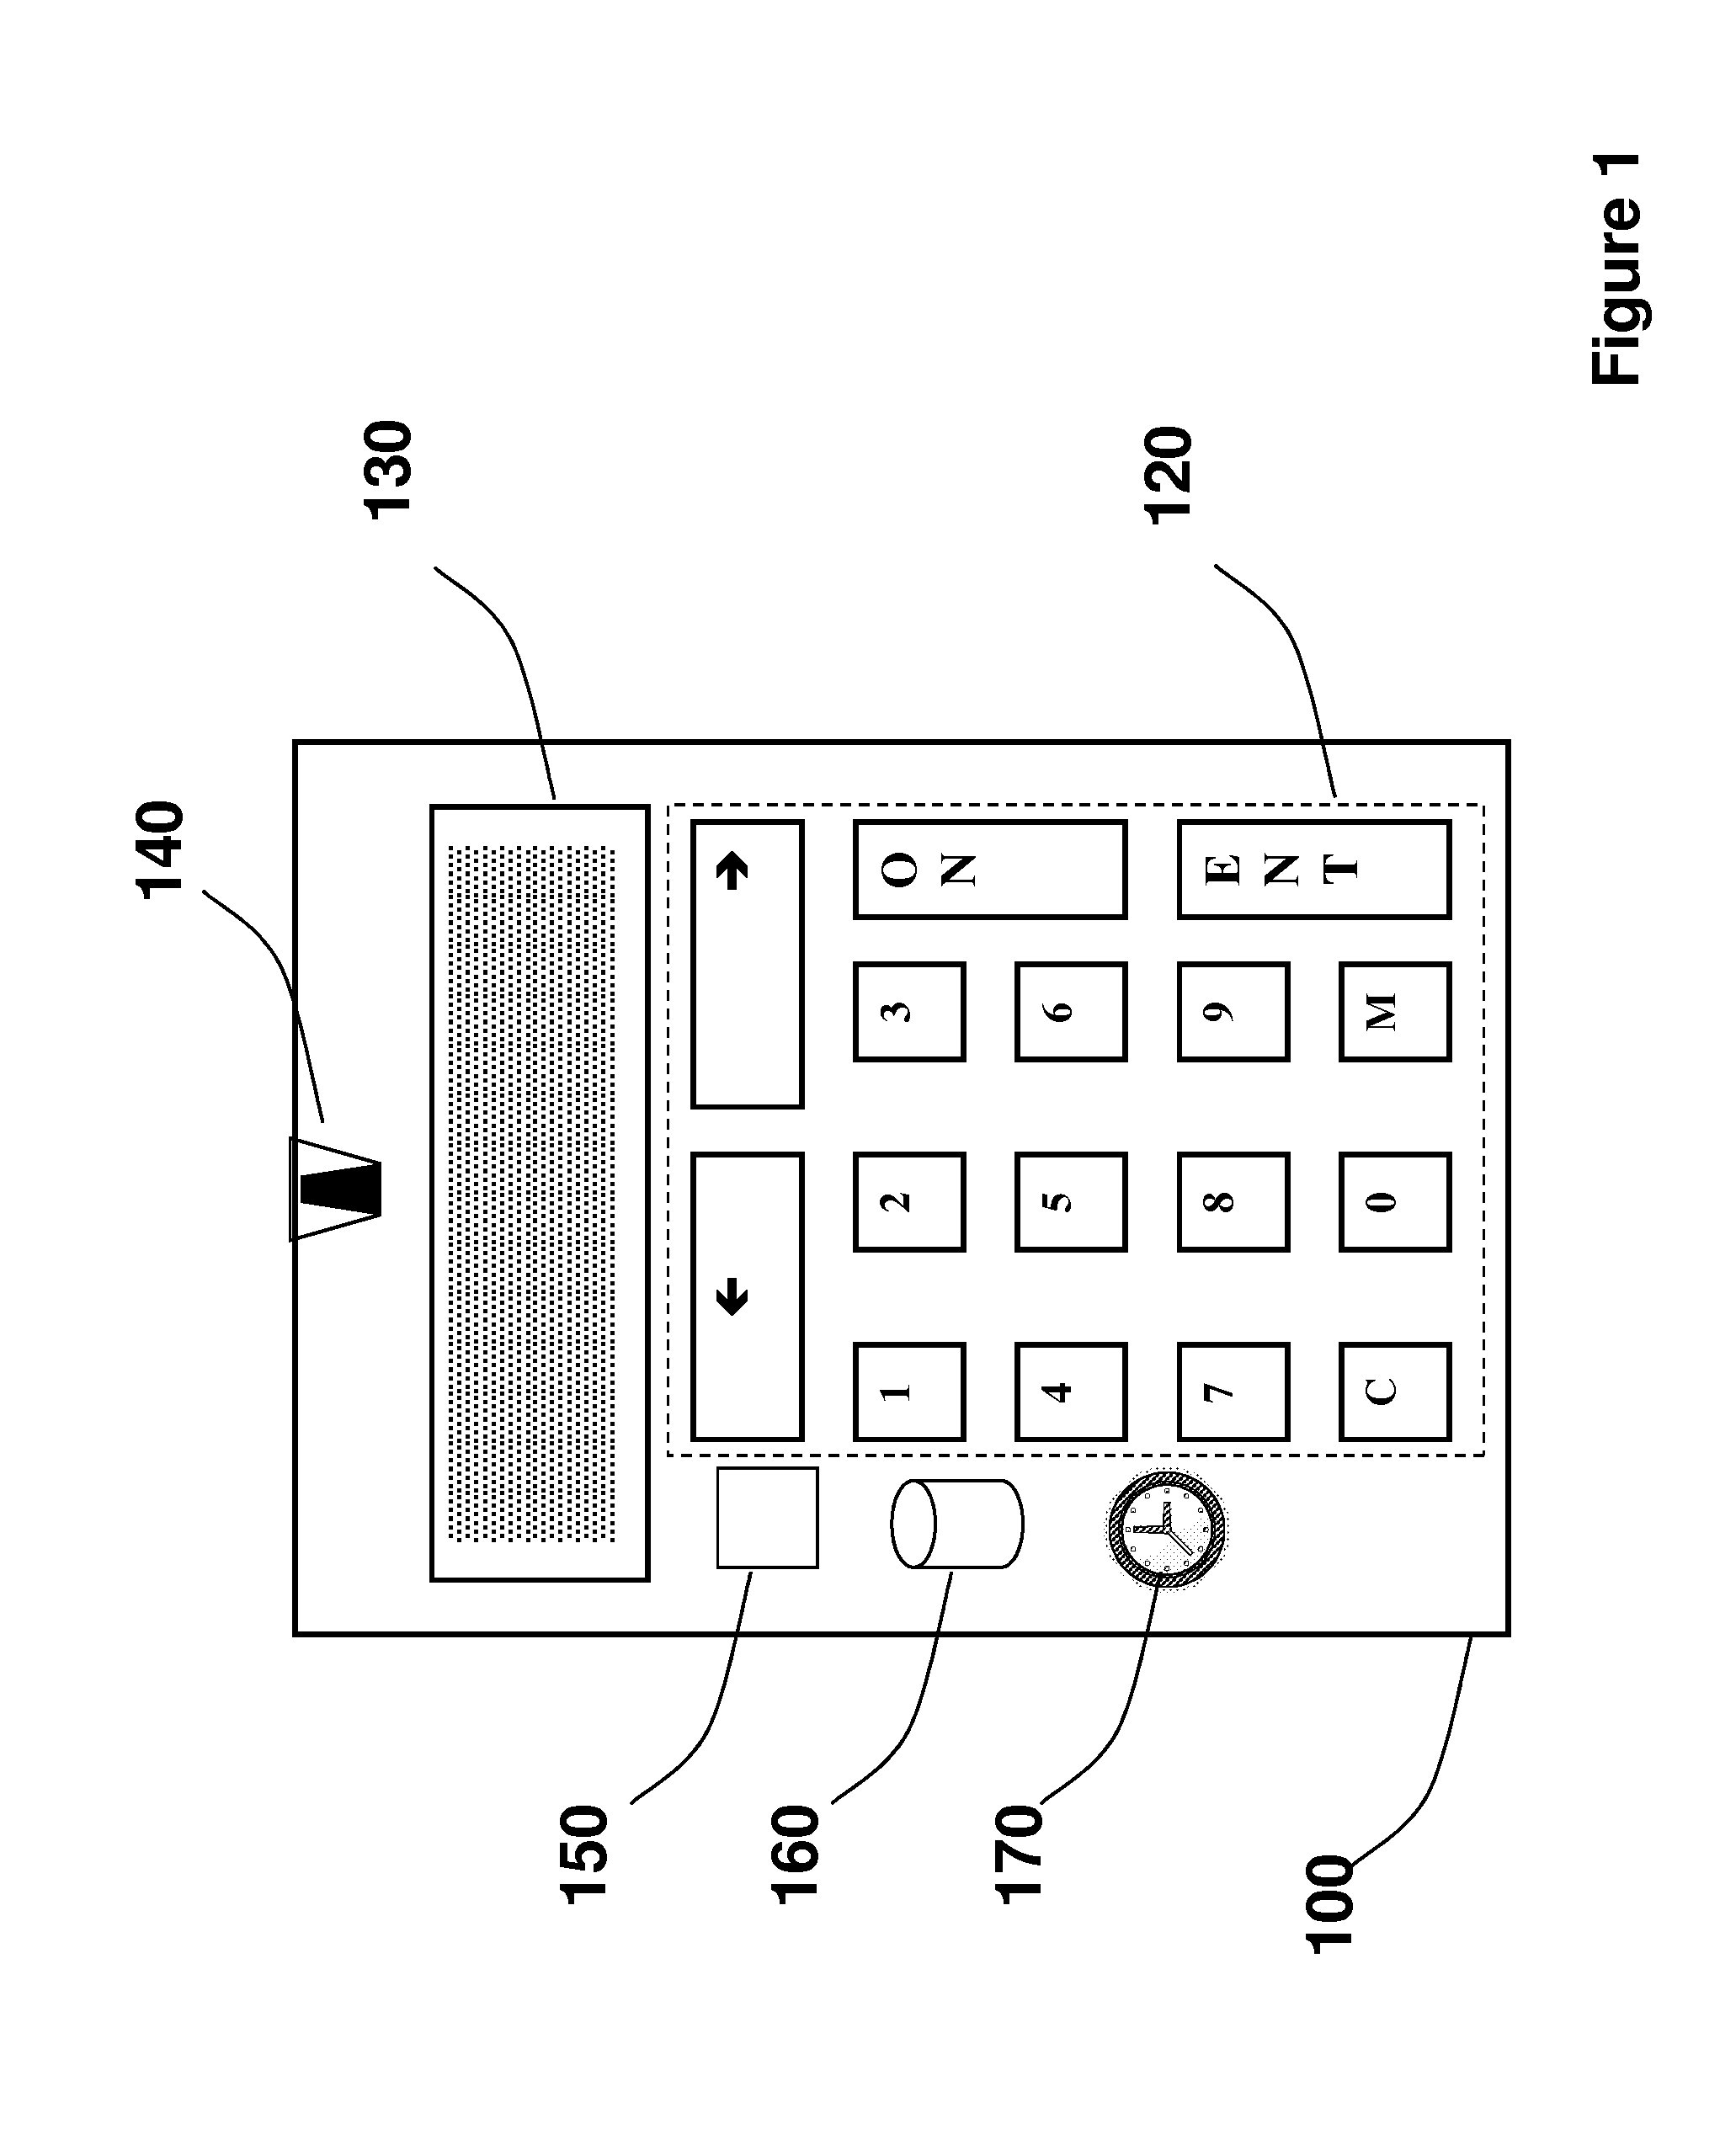 Multi-user strong authentication token